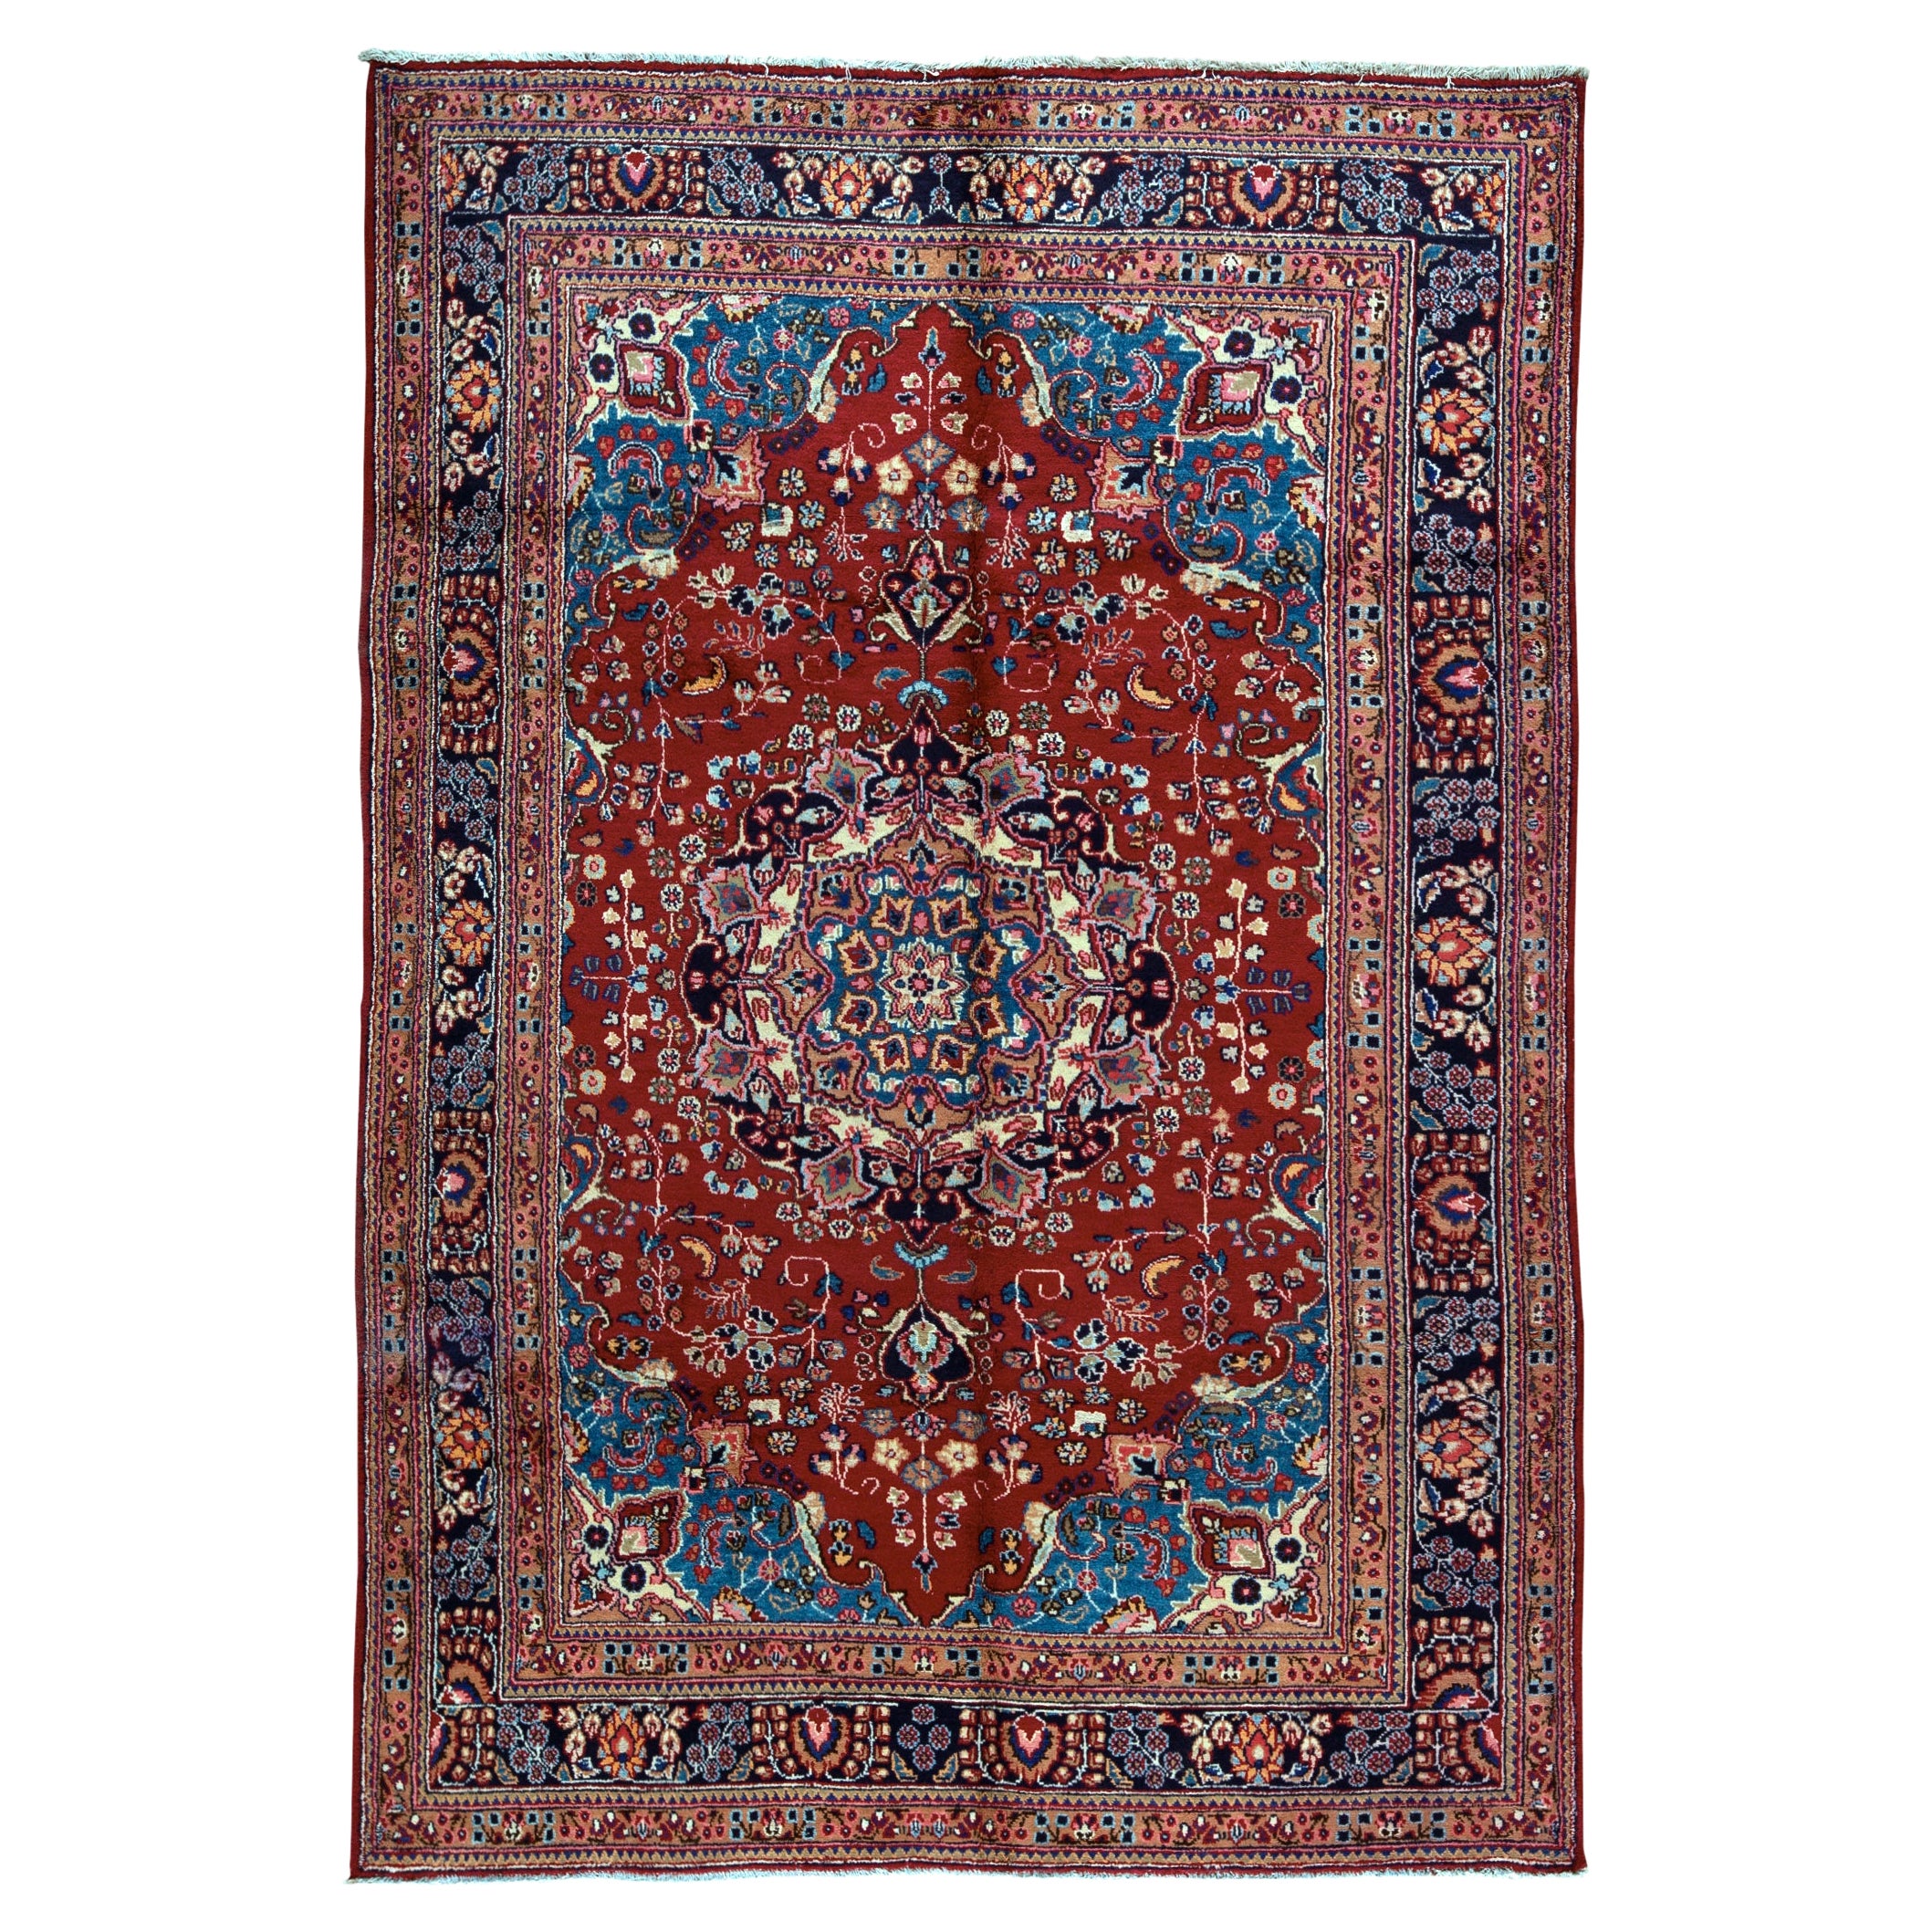   Antique Persian Fine Traditional Handwoven Luxury Wool Red Rug For Sale